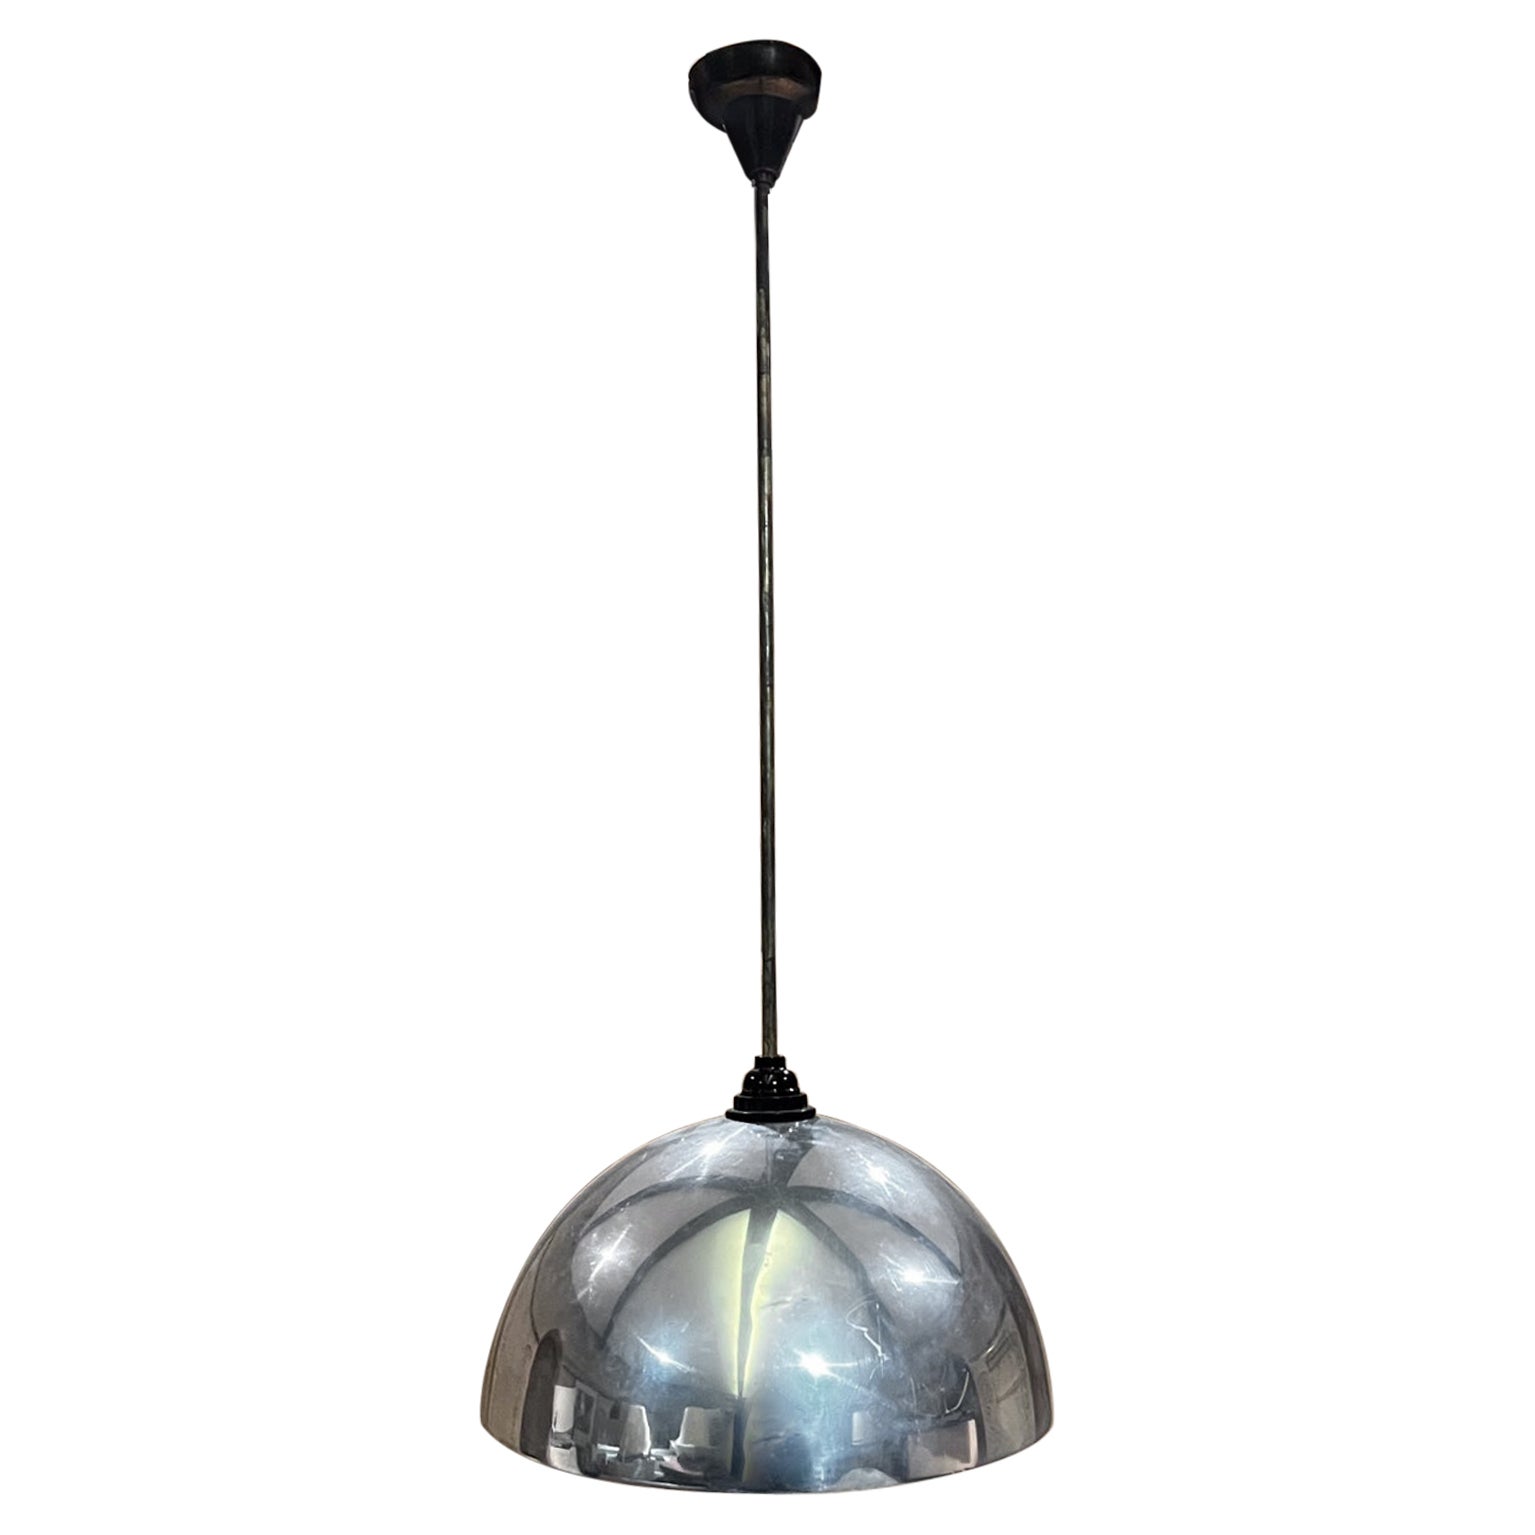 1950s Modernist Space Age Silver Dome Pendant Lamp For Sale